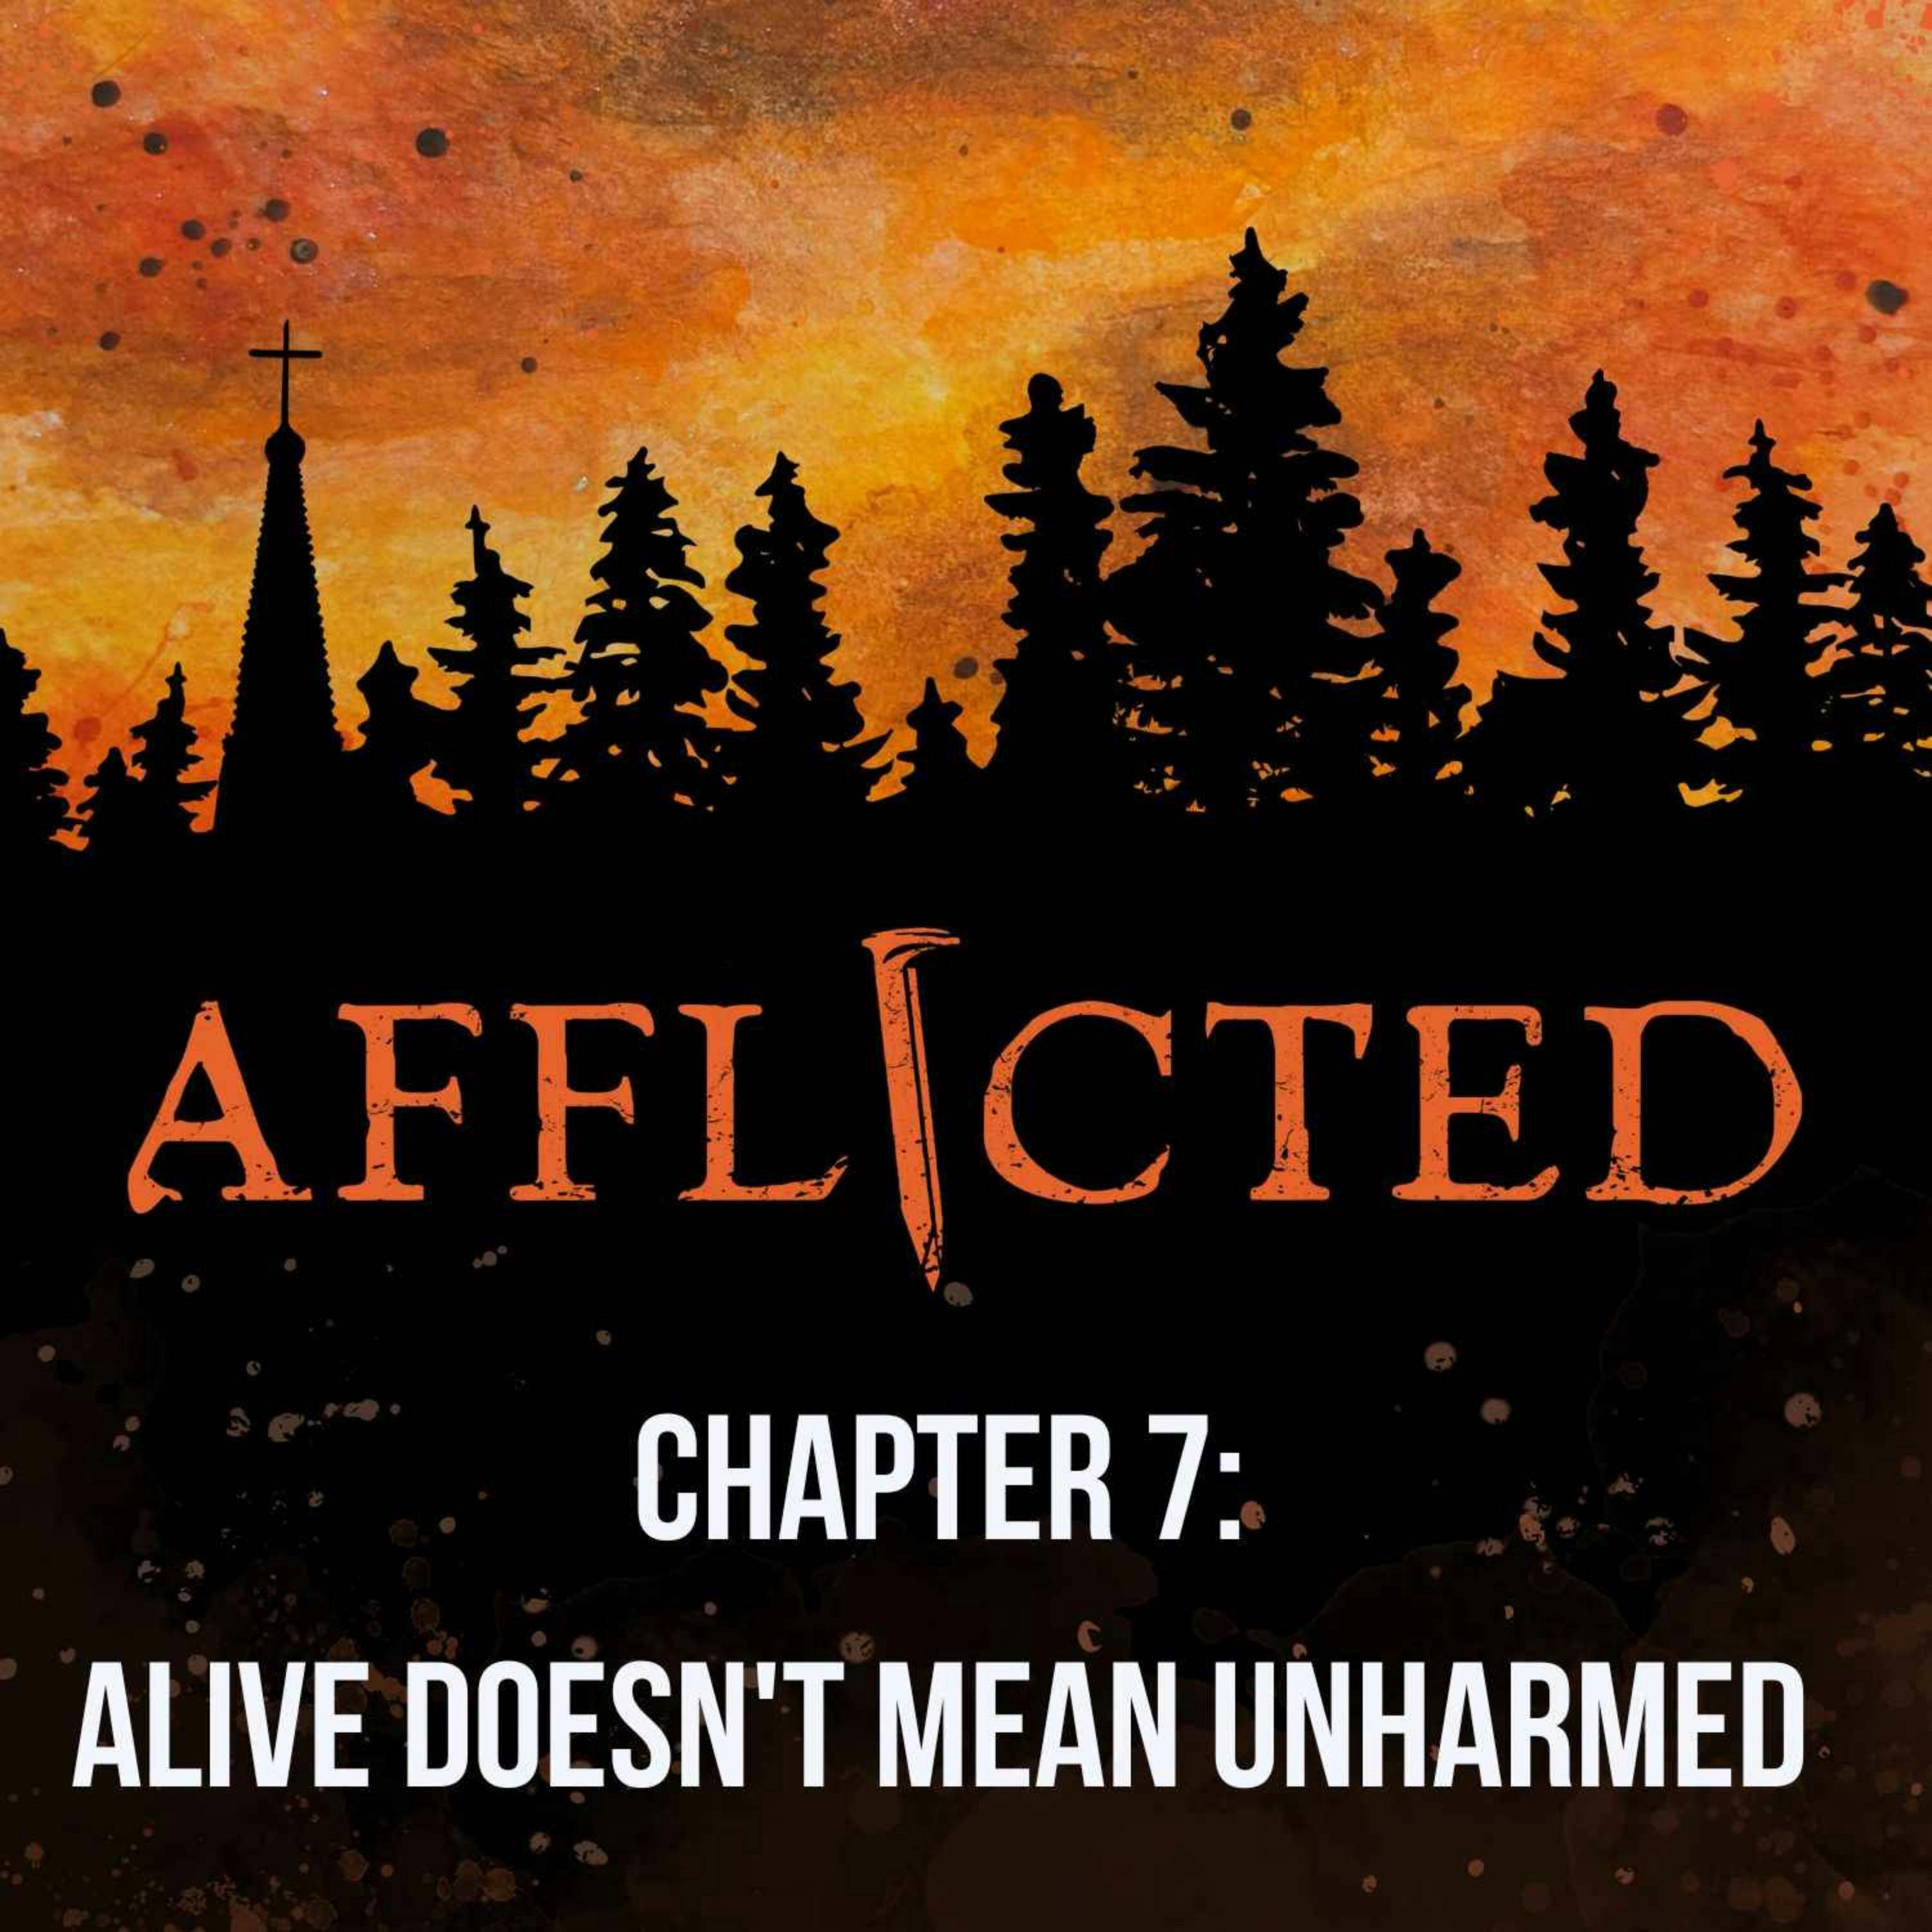 Chapter 7: Alive Doesn’t Mean Unharmed